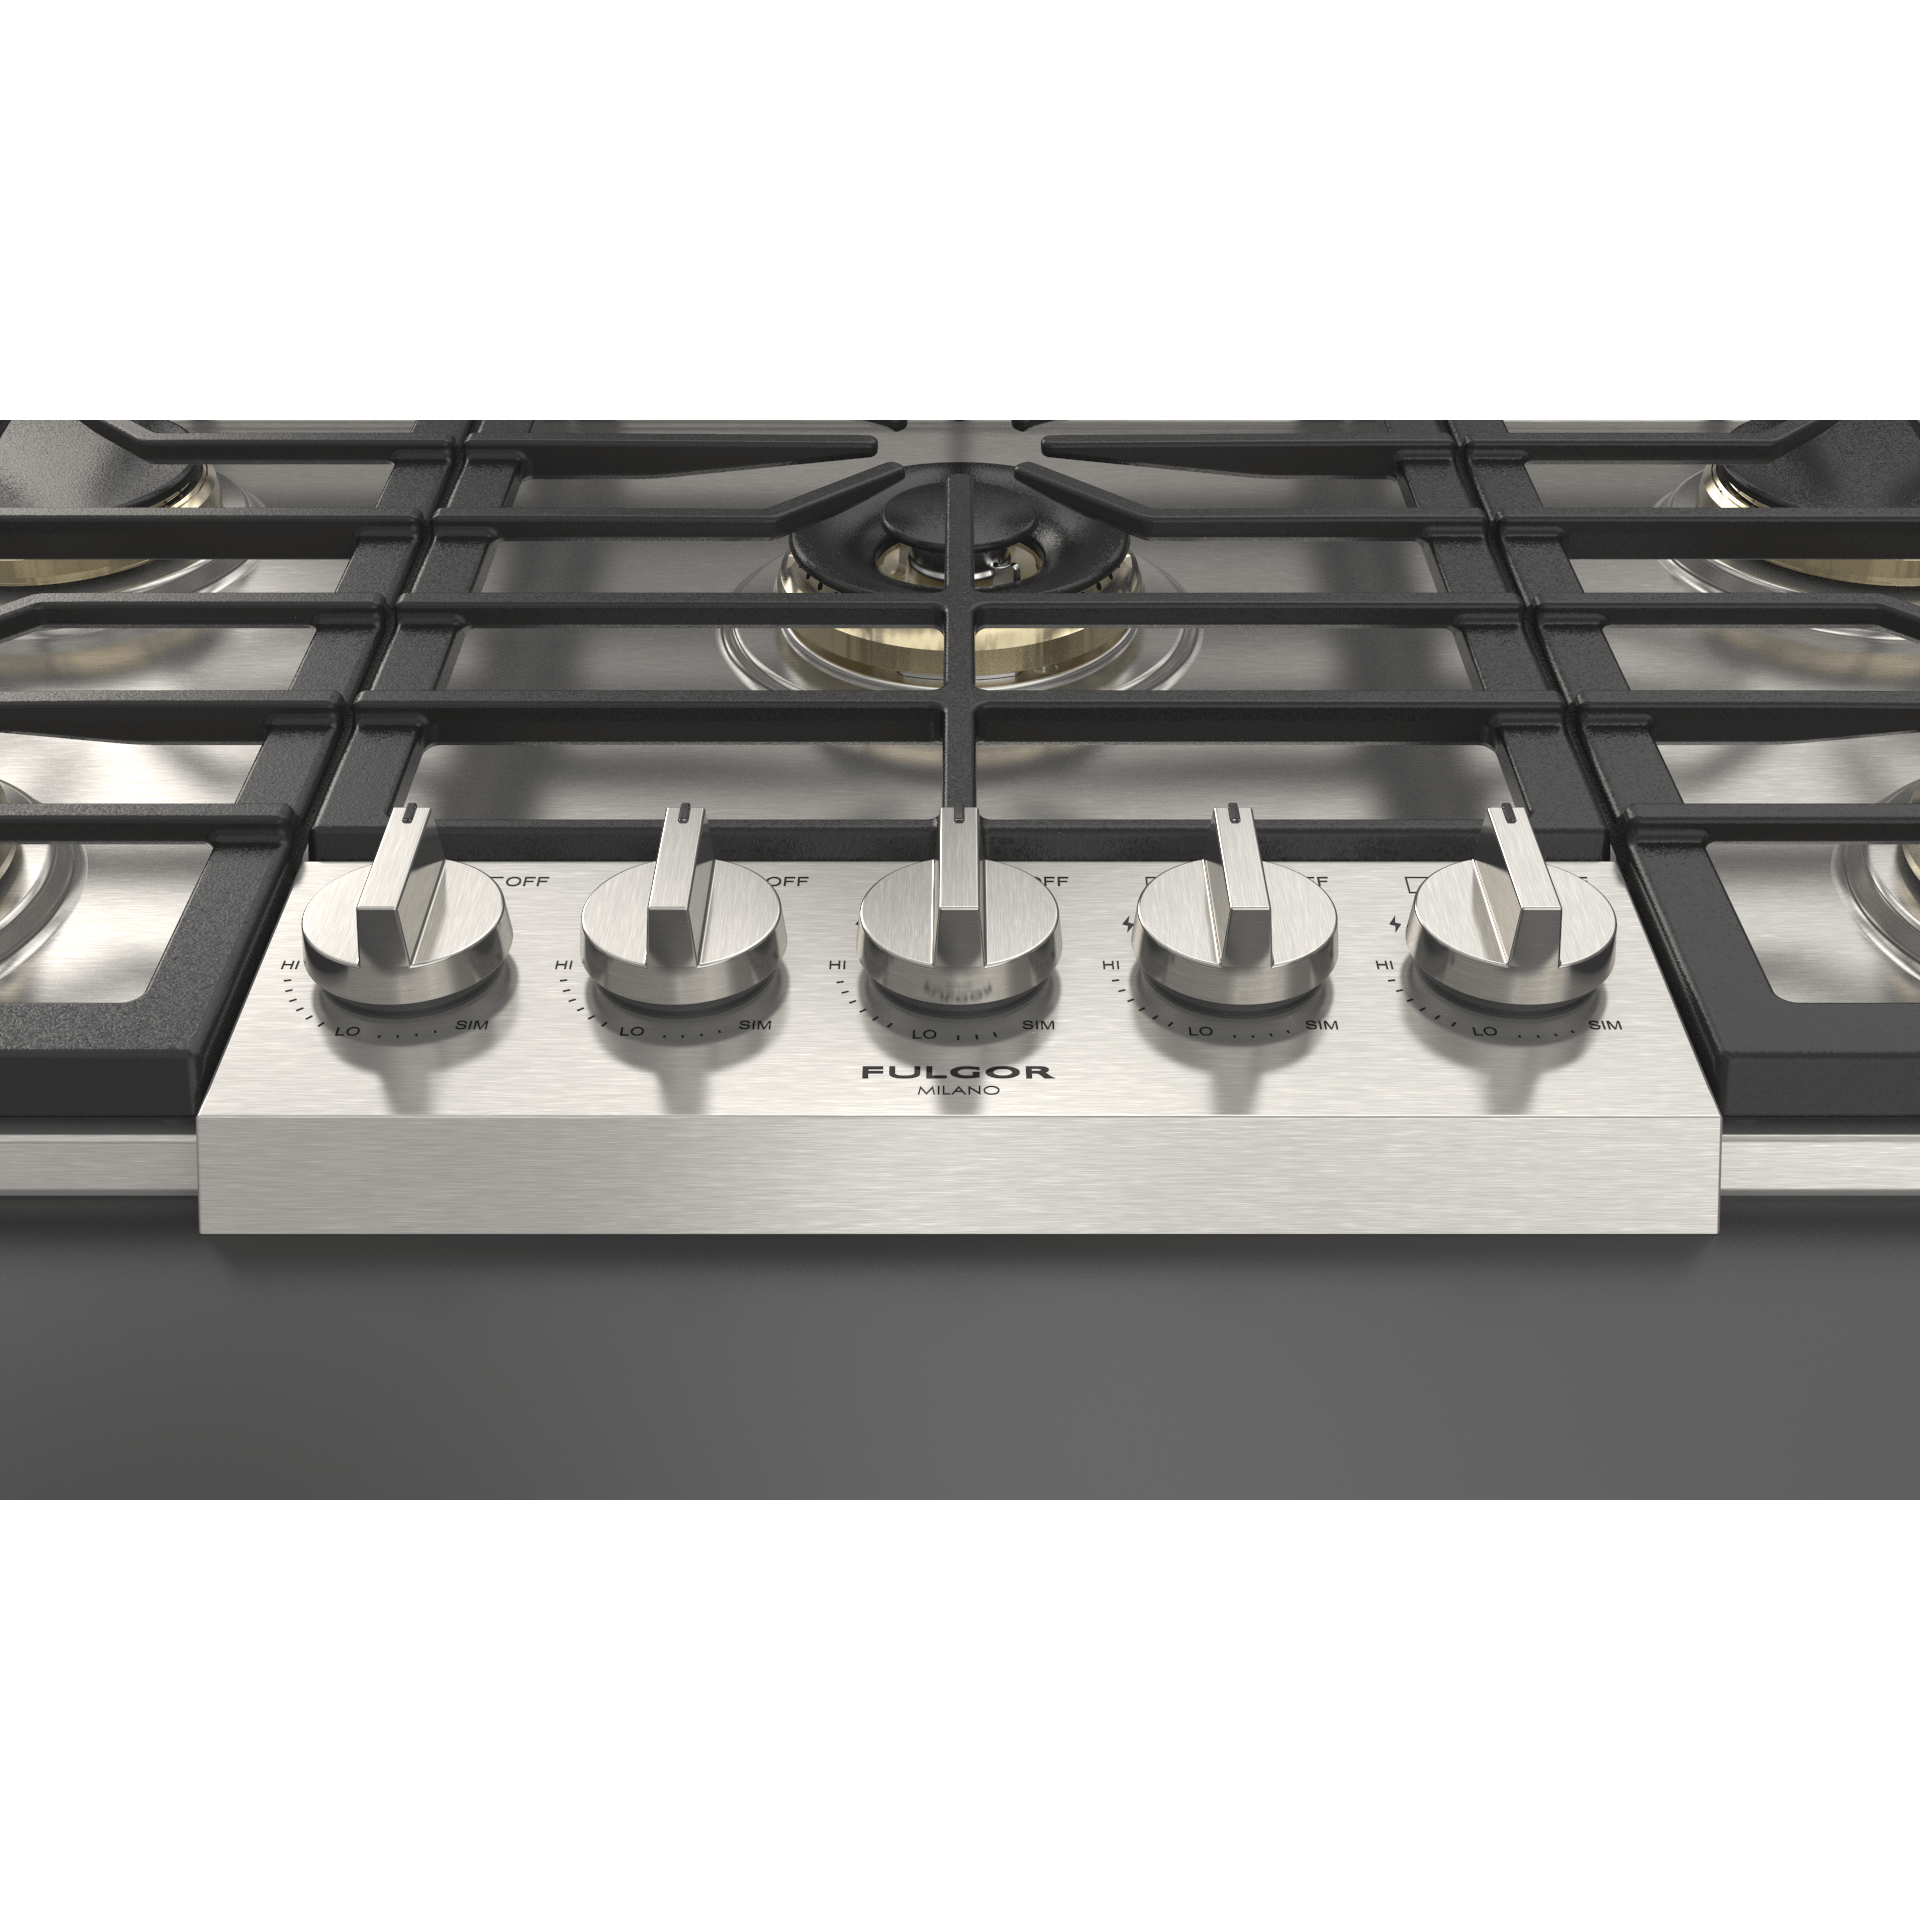 Fulgor Milano 36" Pro-Style Natural Gas Cooktop with 1 Solid Brass Dual-Flame Burner - F6PGK365S1 Cooktops F6PGK365S1 Luxury Appliances Direct